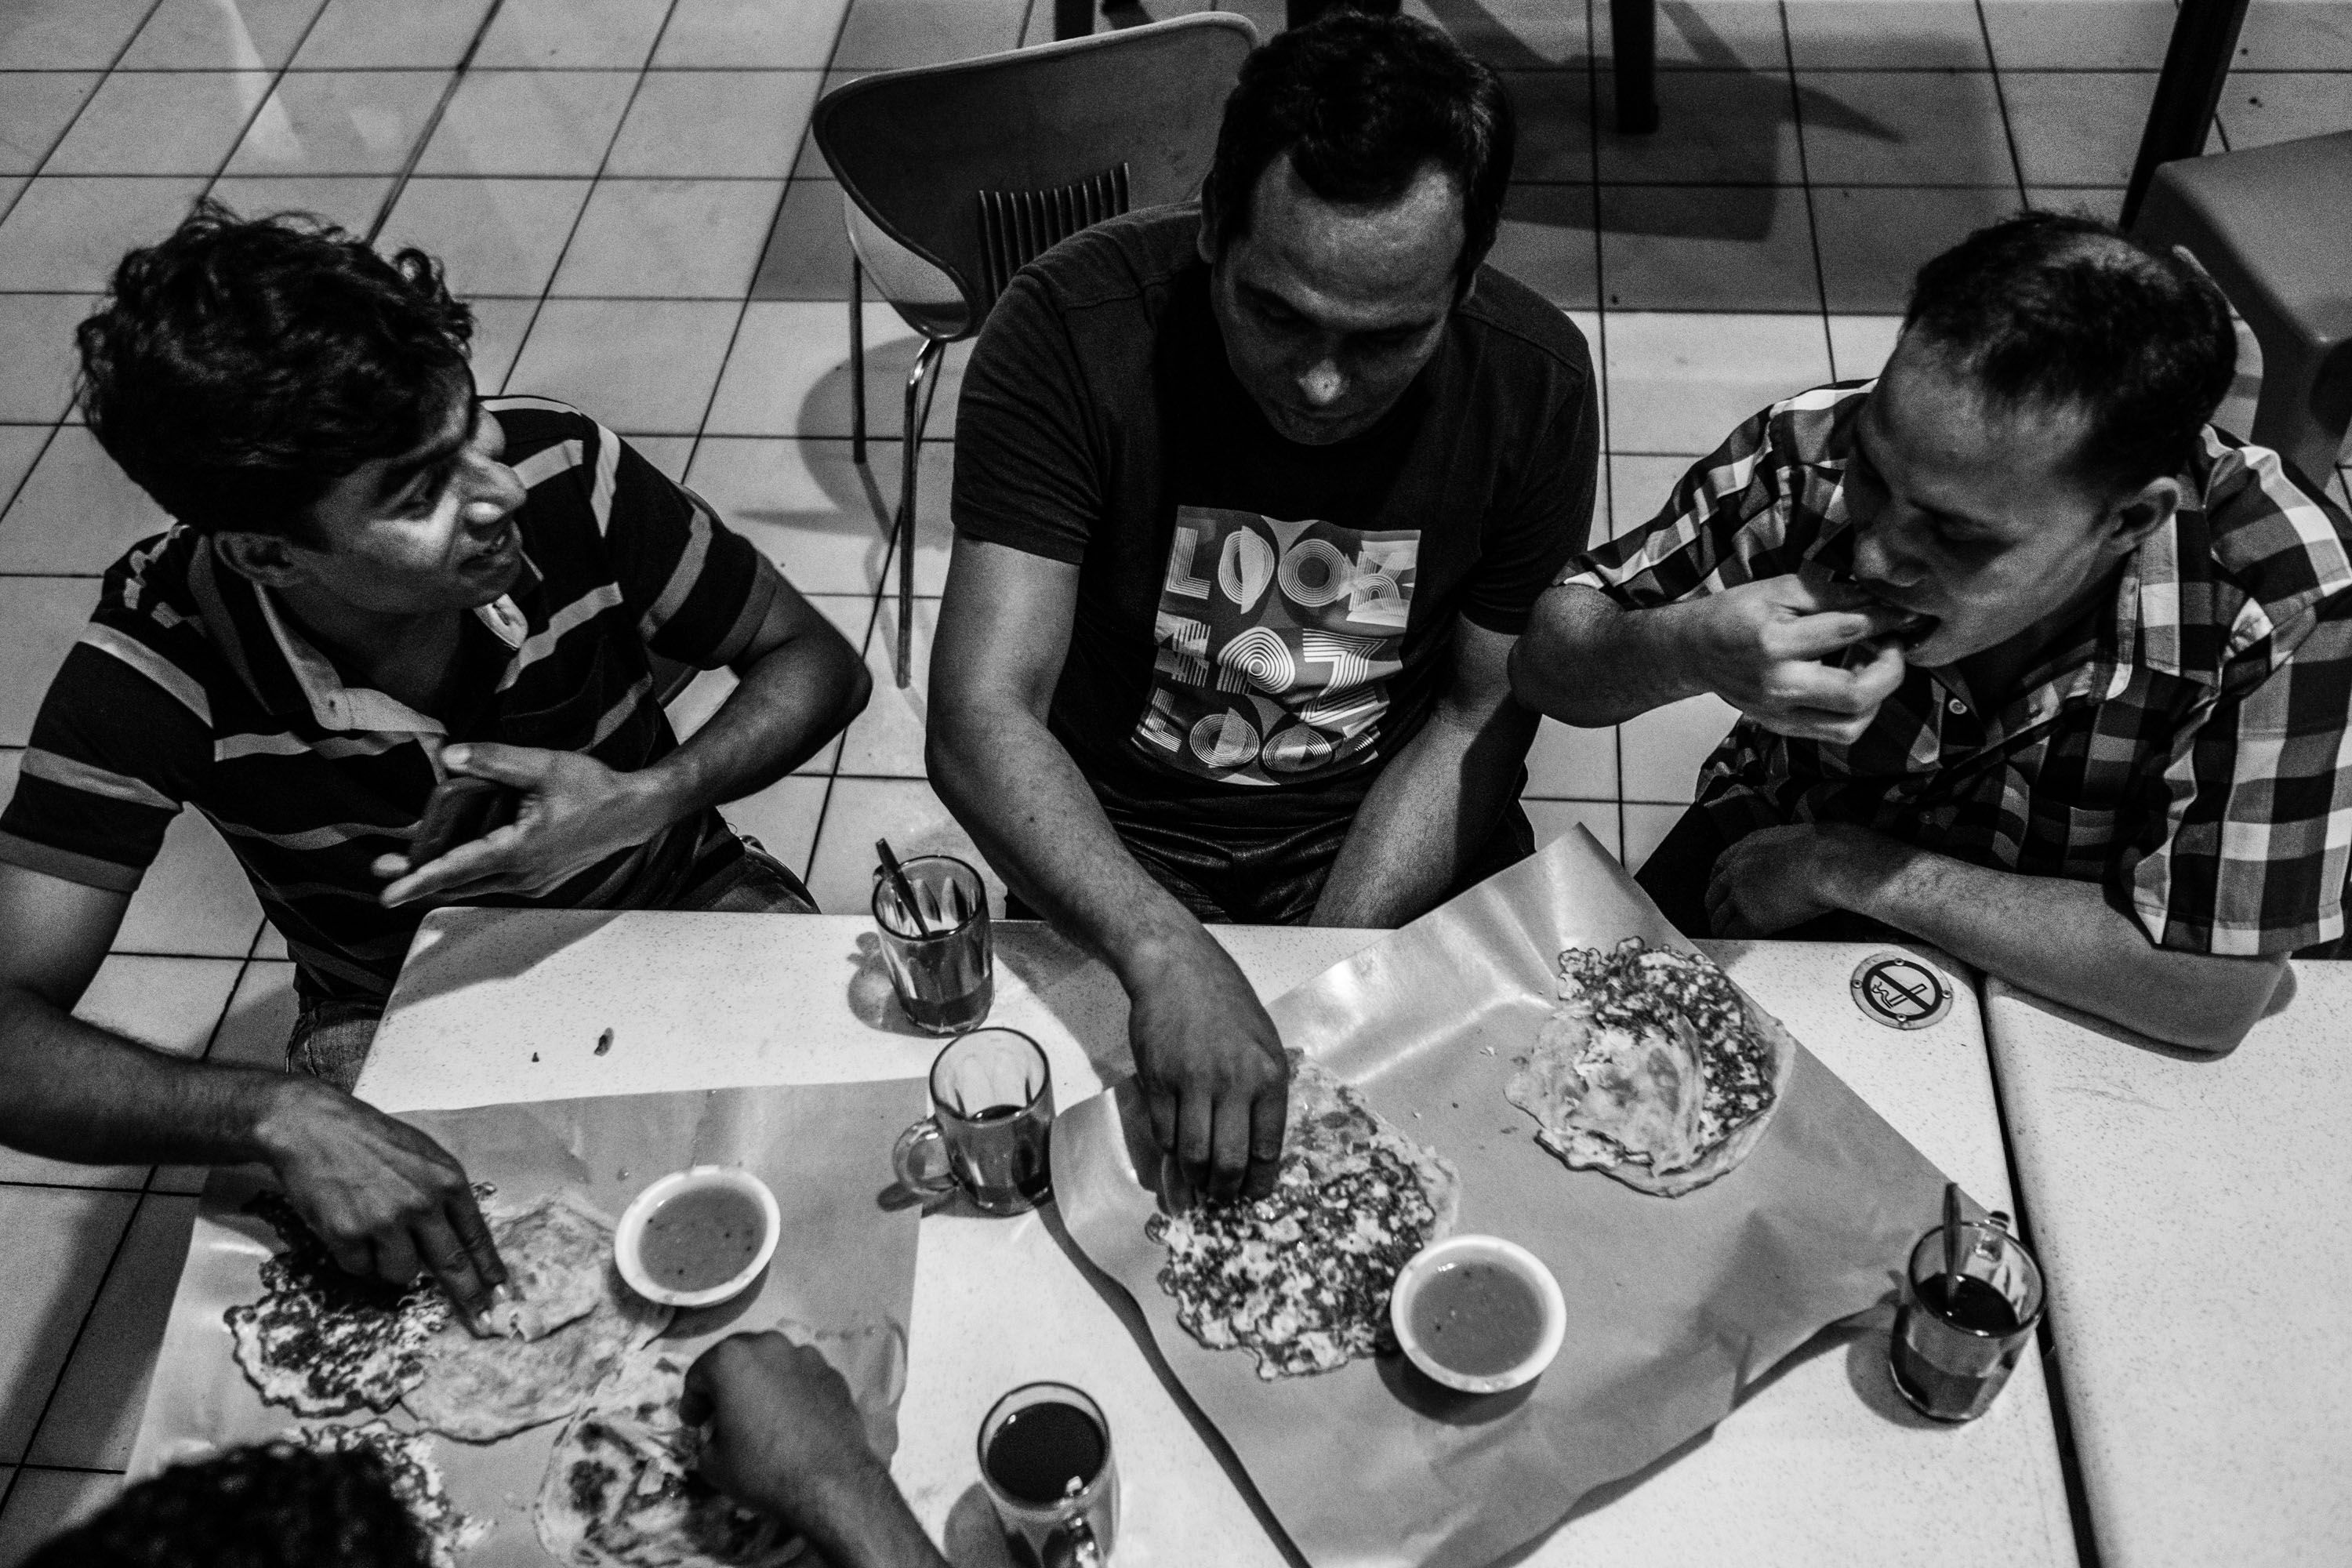 Mr. Haque and his friends enjoy a simple meal in Singapore. Roti prata, a fried flat bread, is their meal of choice because it is cheap. Image by Xyza Bacani. Singapore, 2016.